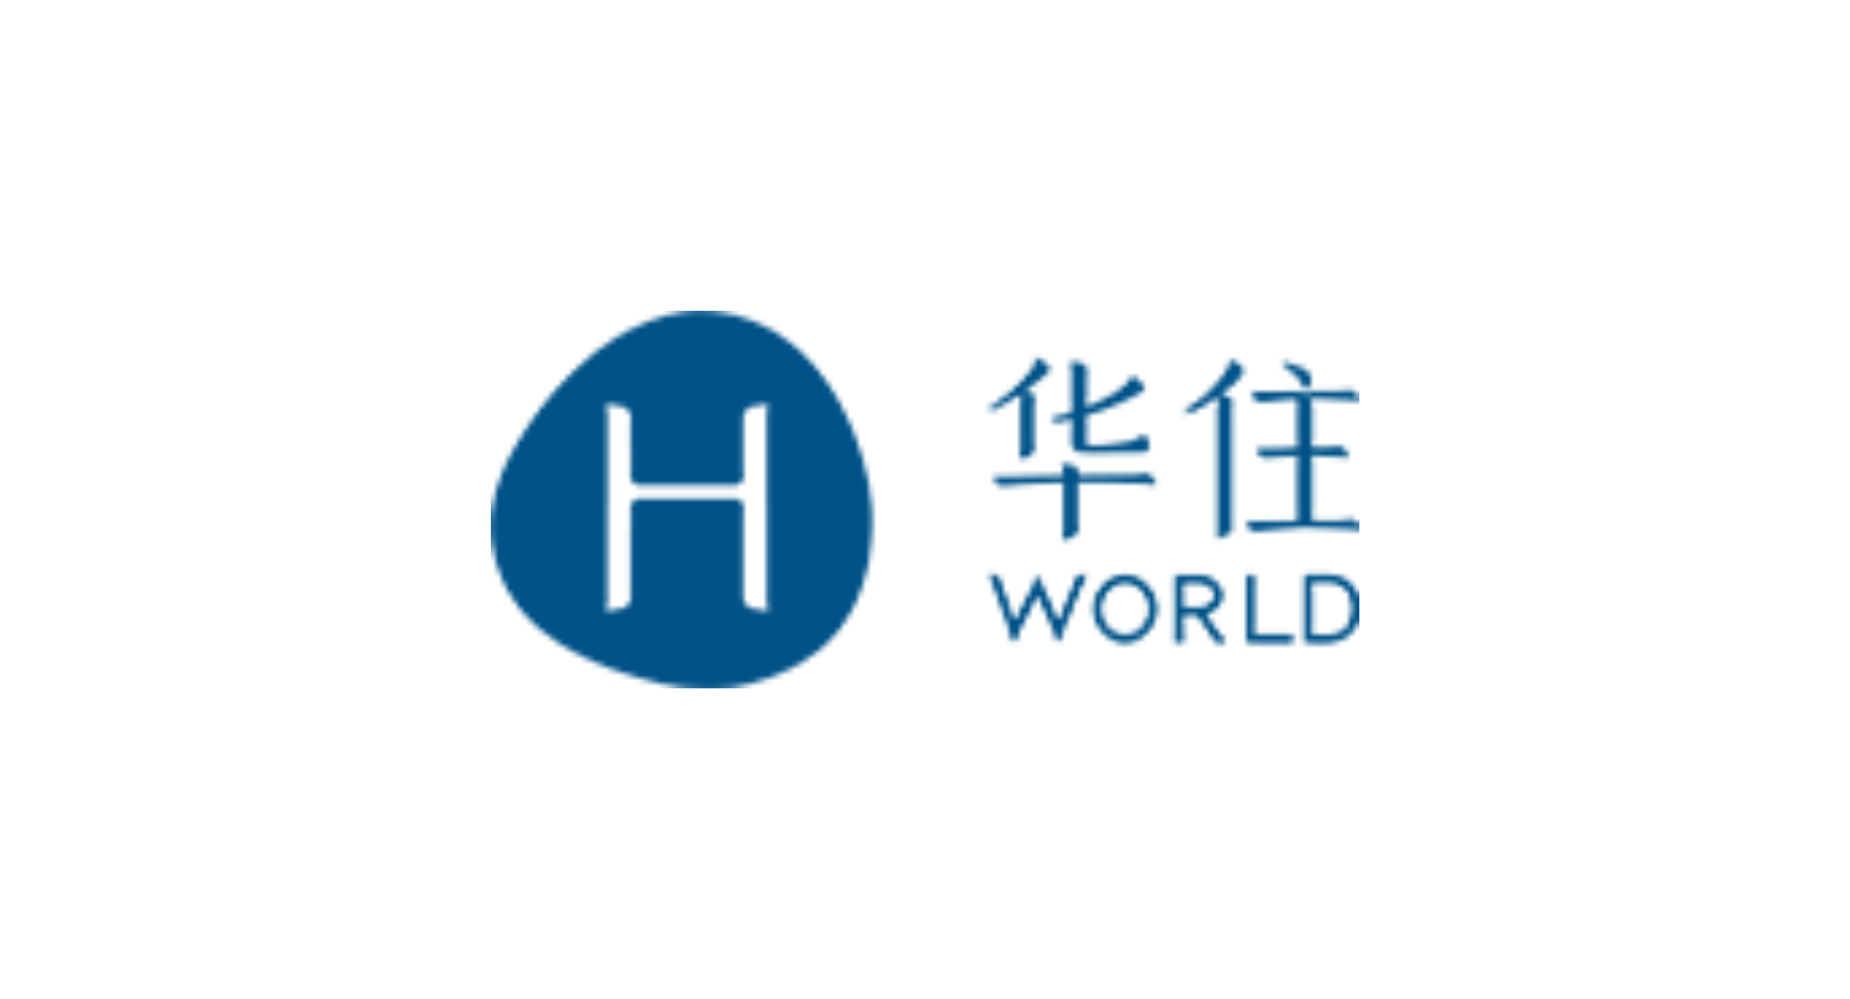 H World Q1: Earnings Beat, Revenue Up 67%, Pend-Up Demand & More